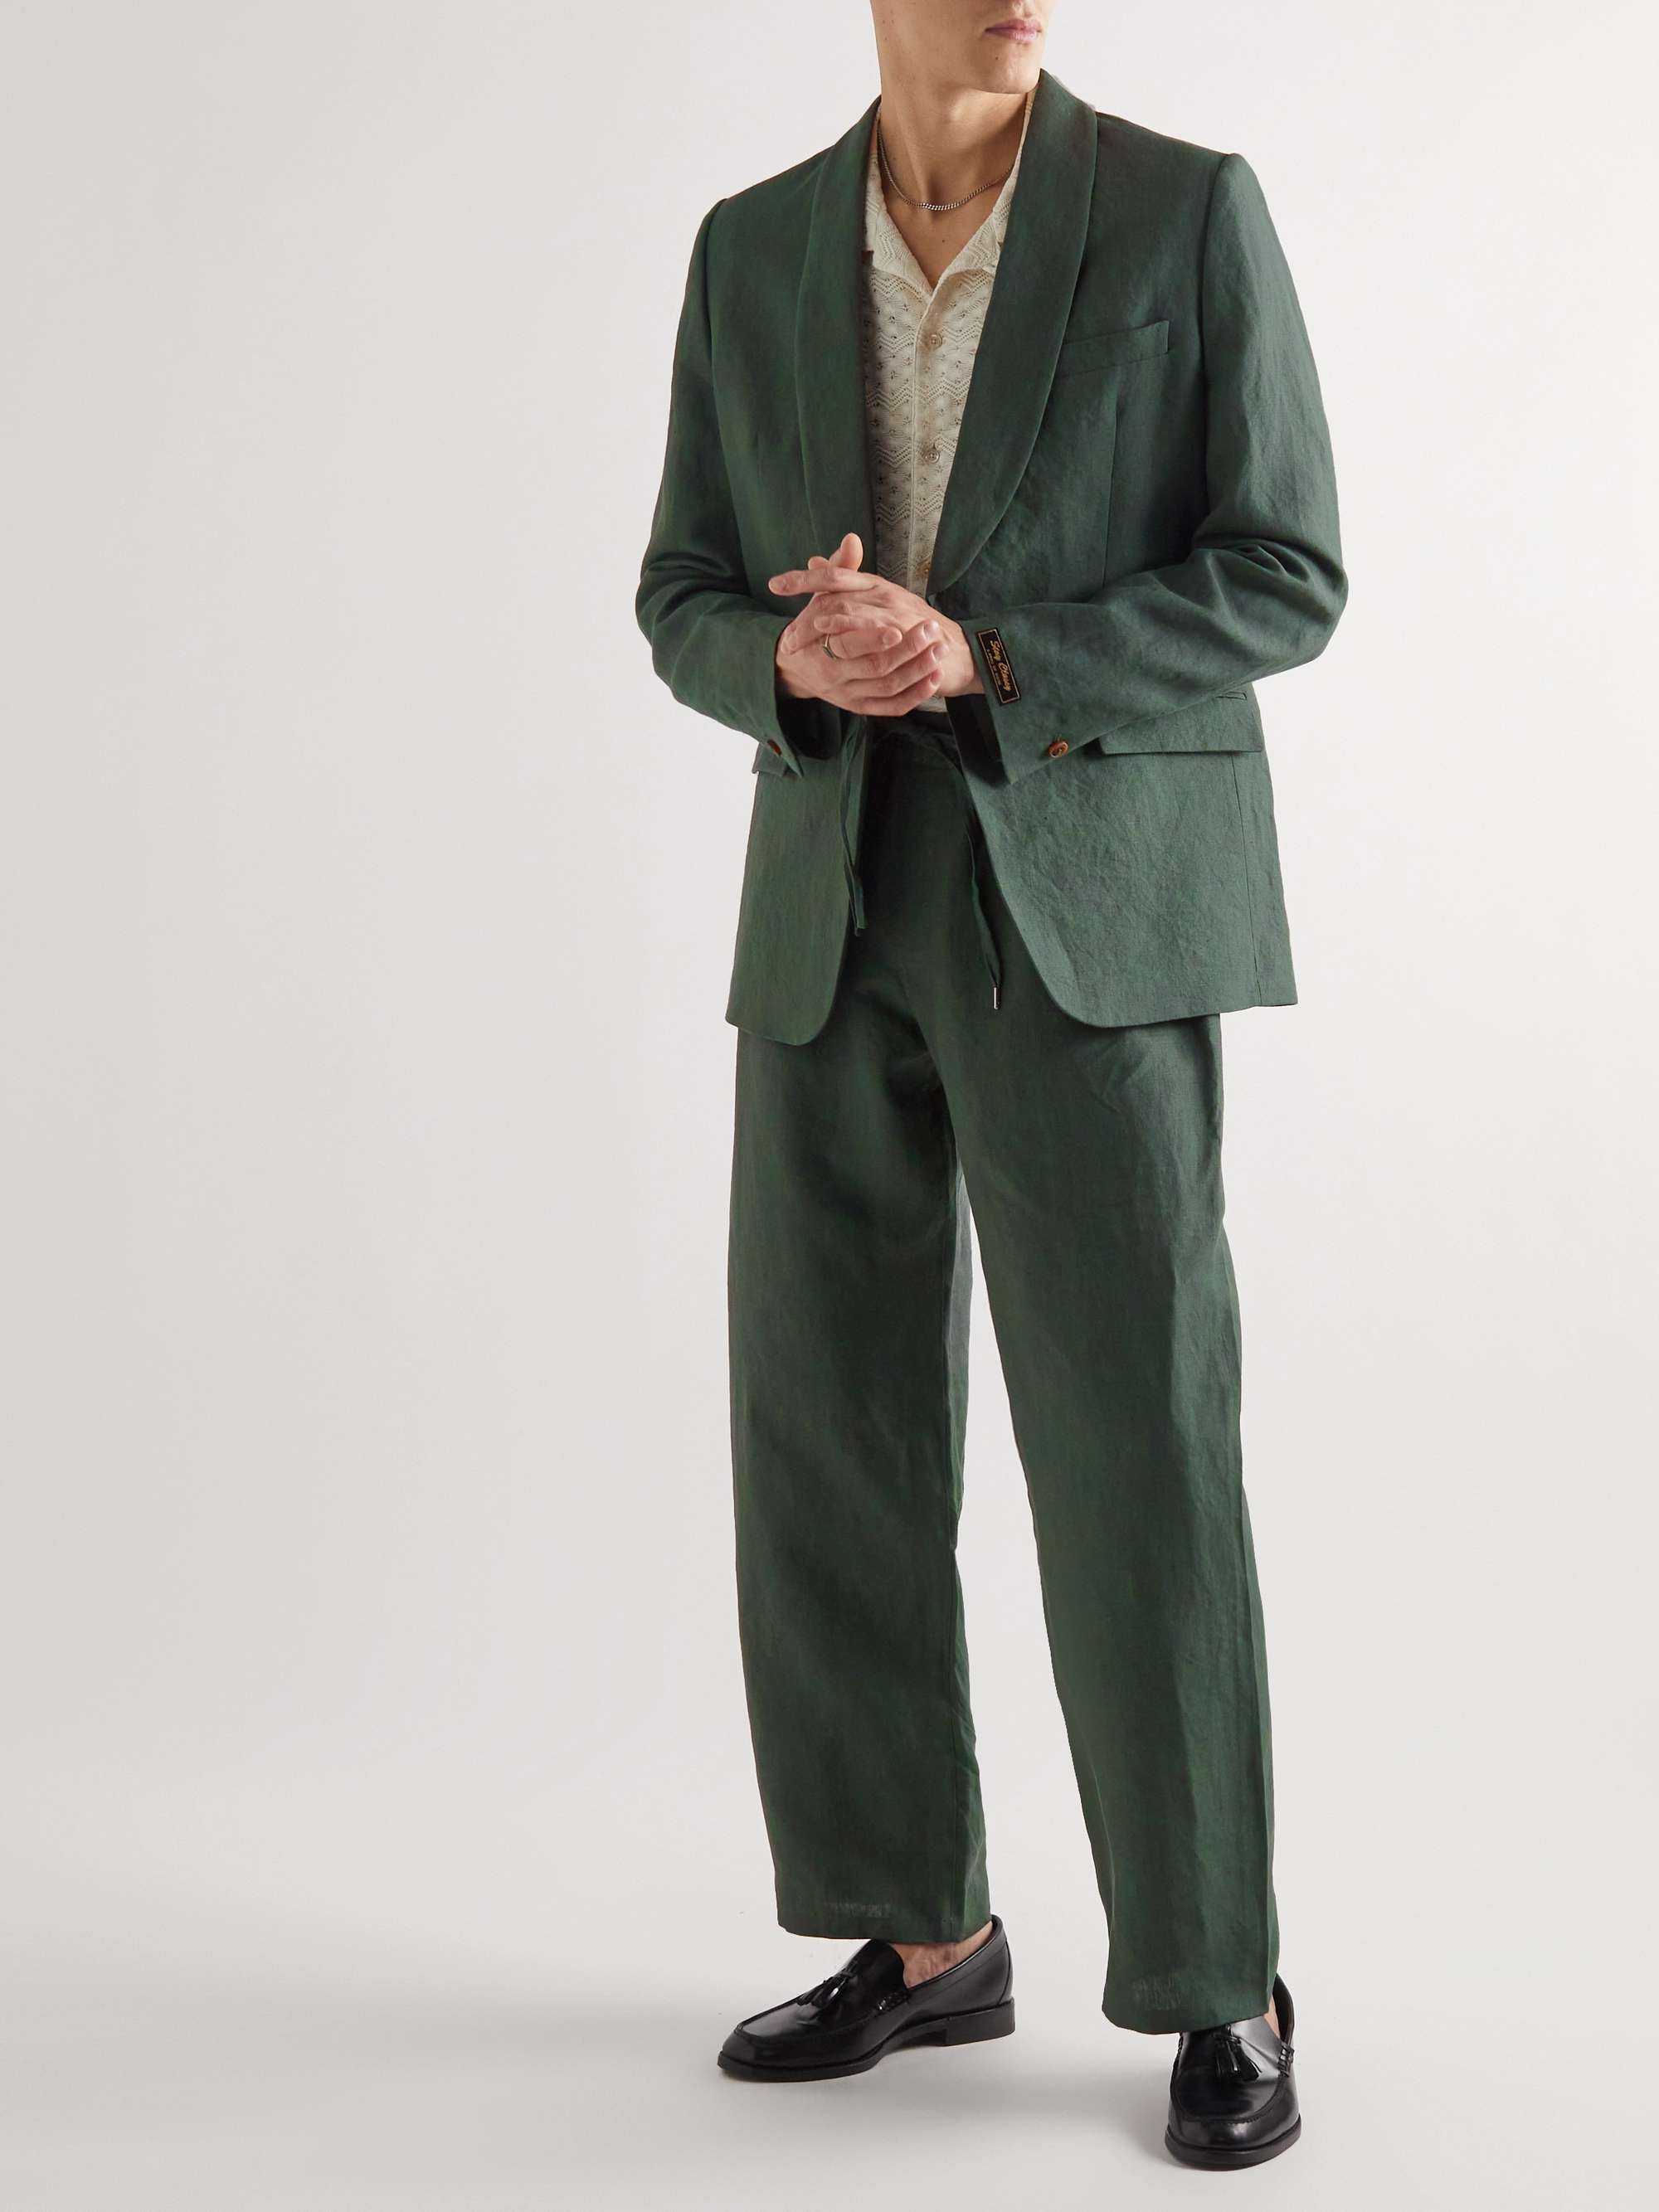 A KIND OF GUISE Shawl-Collar Linen Suit Jacket